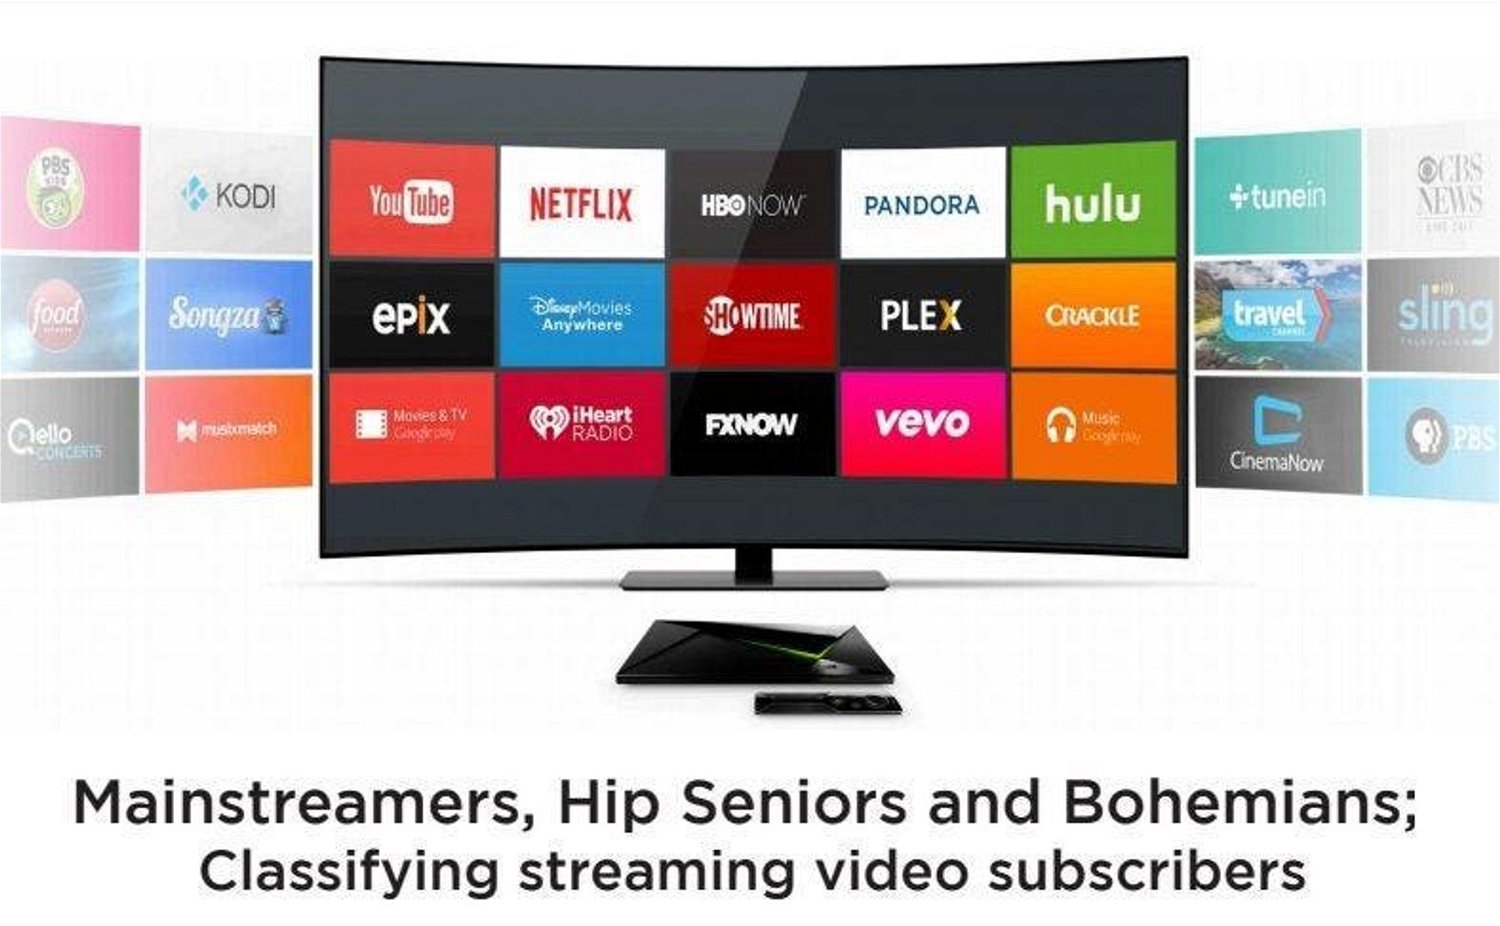 New Research Highlights Streaming Demographic Trends